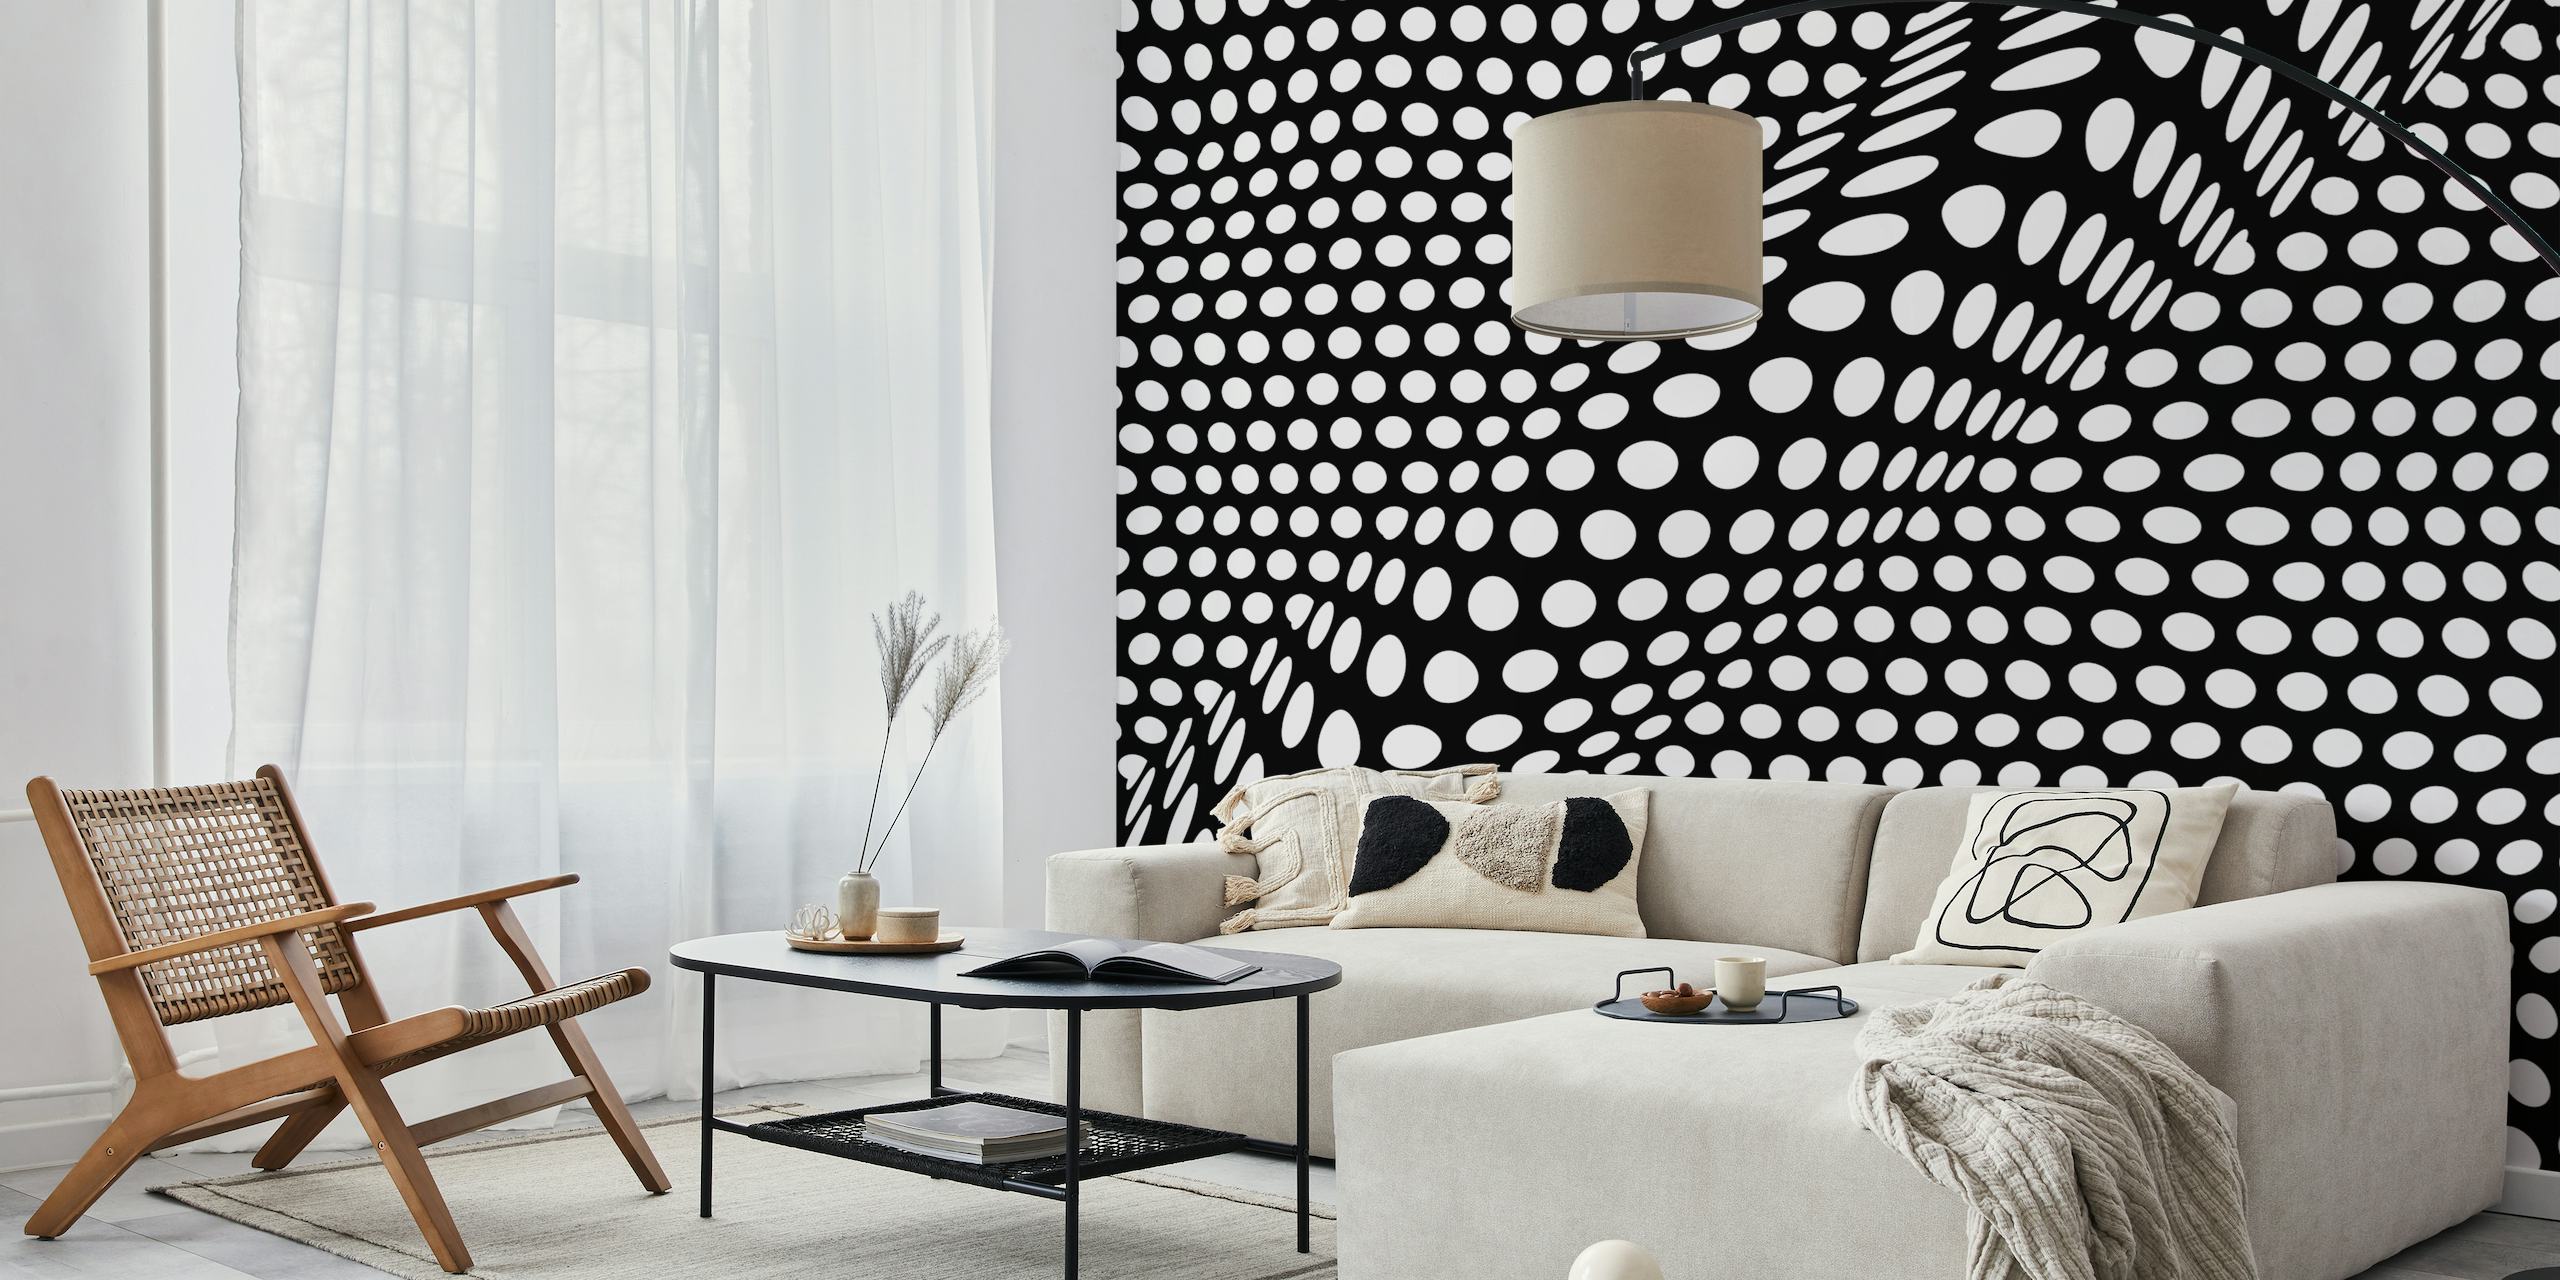 Black and white op-art mural with dots creating an optical illusion